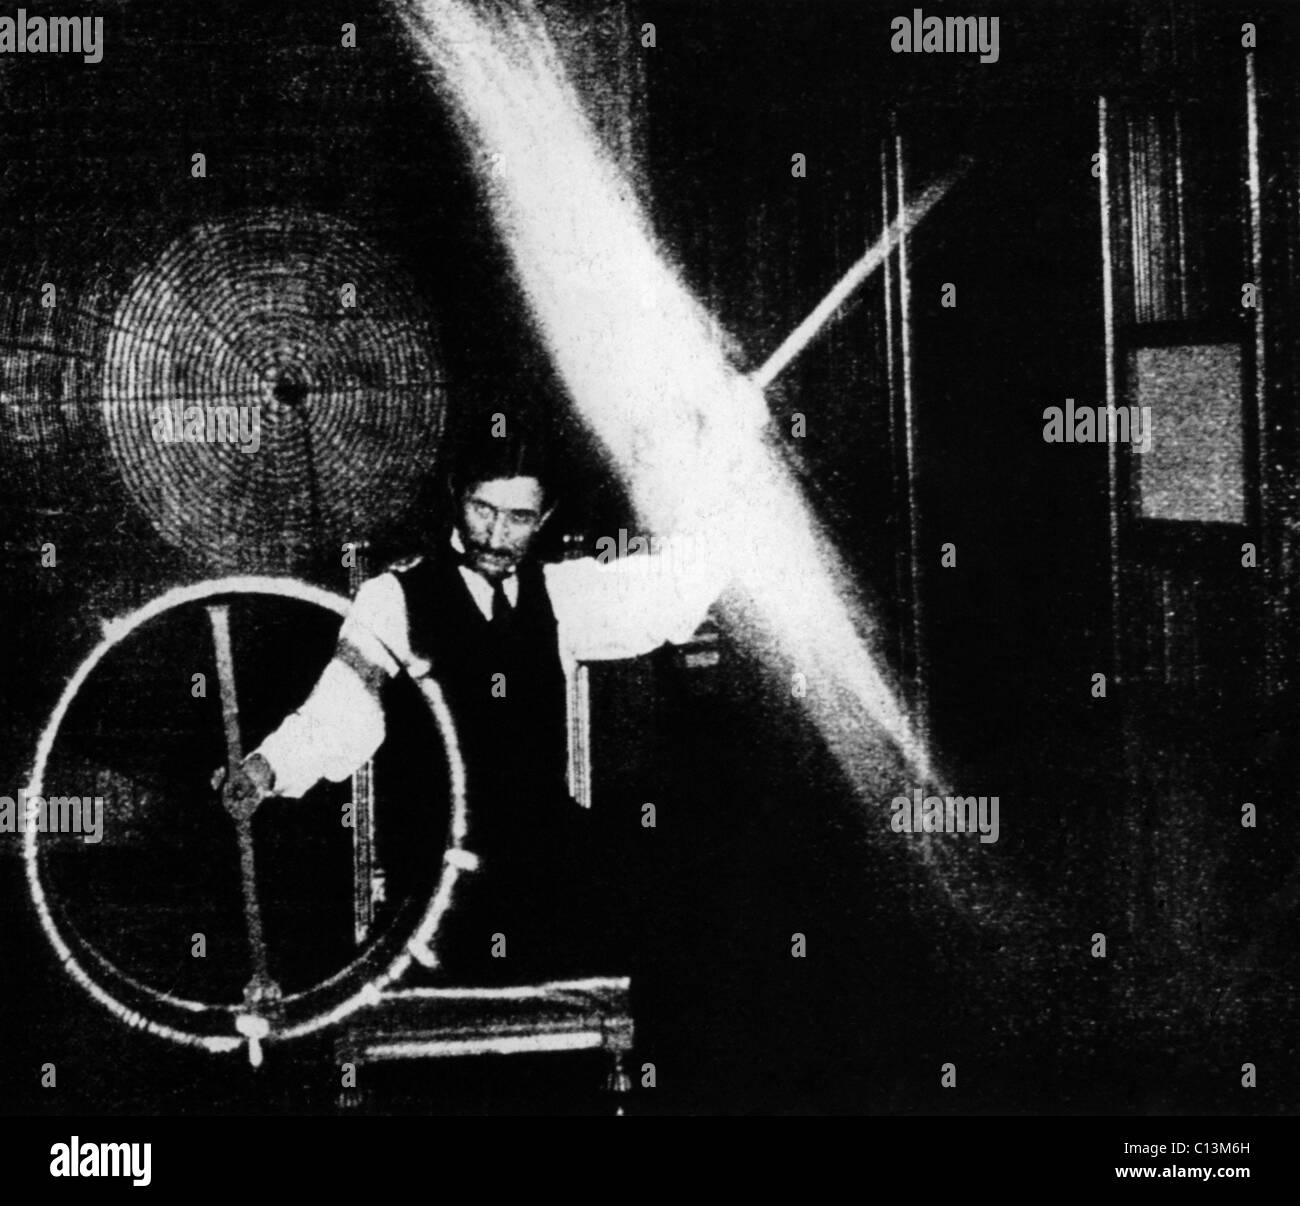 Nikola Tesla 1856-1943 conducted spectacular demonstrations of electricity. This image published in ELECTRICAL REVIEW in 1899 was accompanied by with this caption The operator's body in this experiment is charged to a high potential by means of a coil responsive to the waves transmitted to it from a distant oscillator. Stock Photo